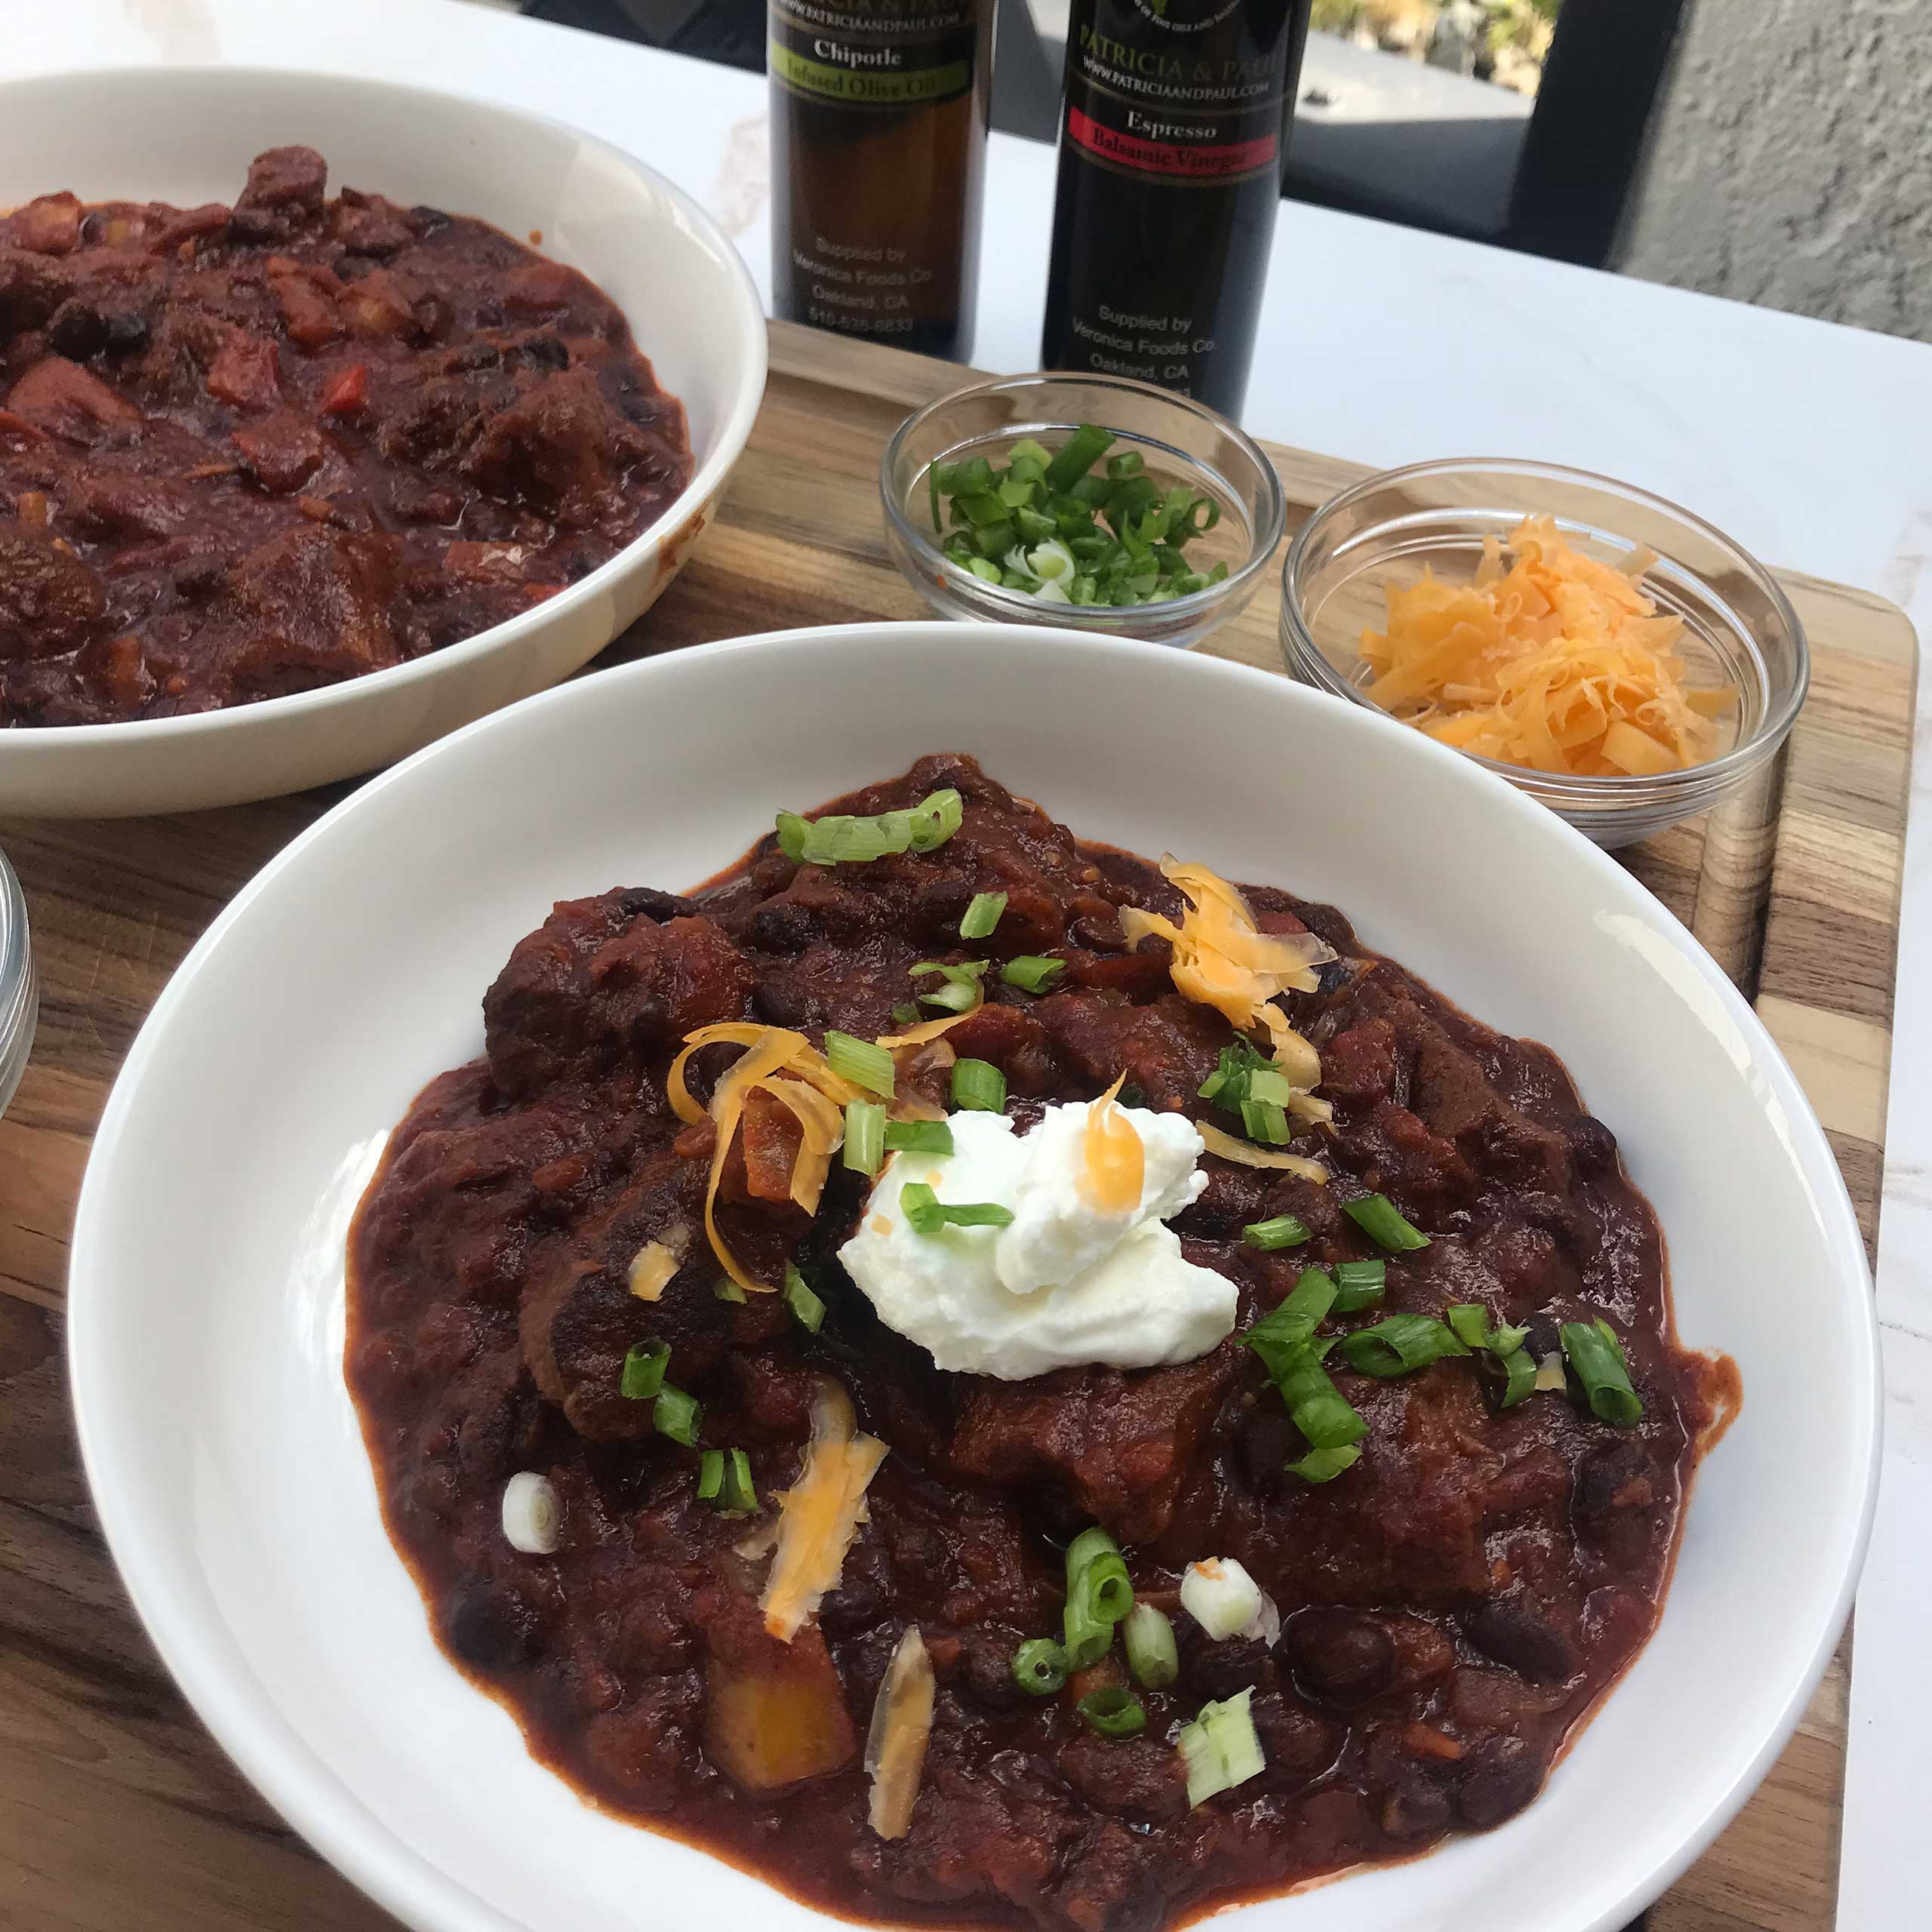 Smoky Chipotle Chili | My Curated Tastes